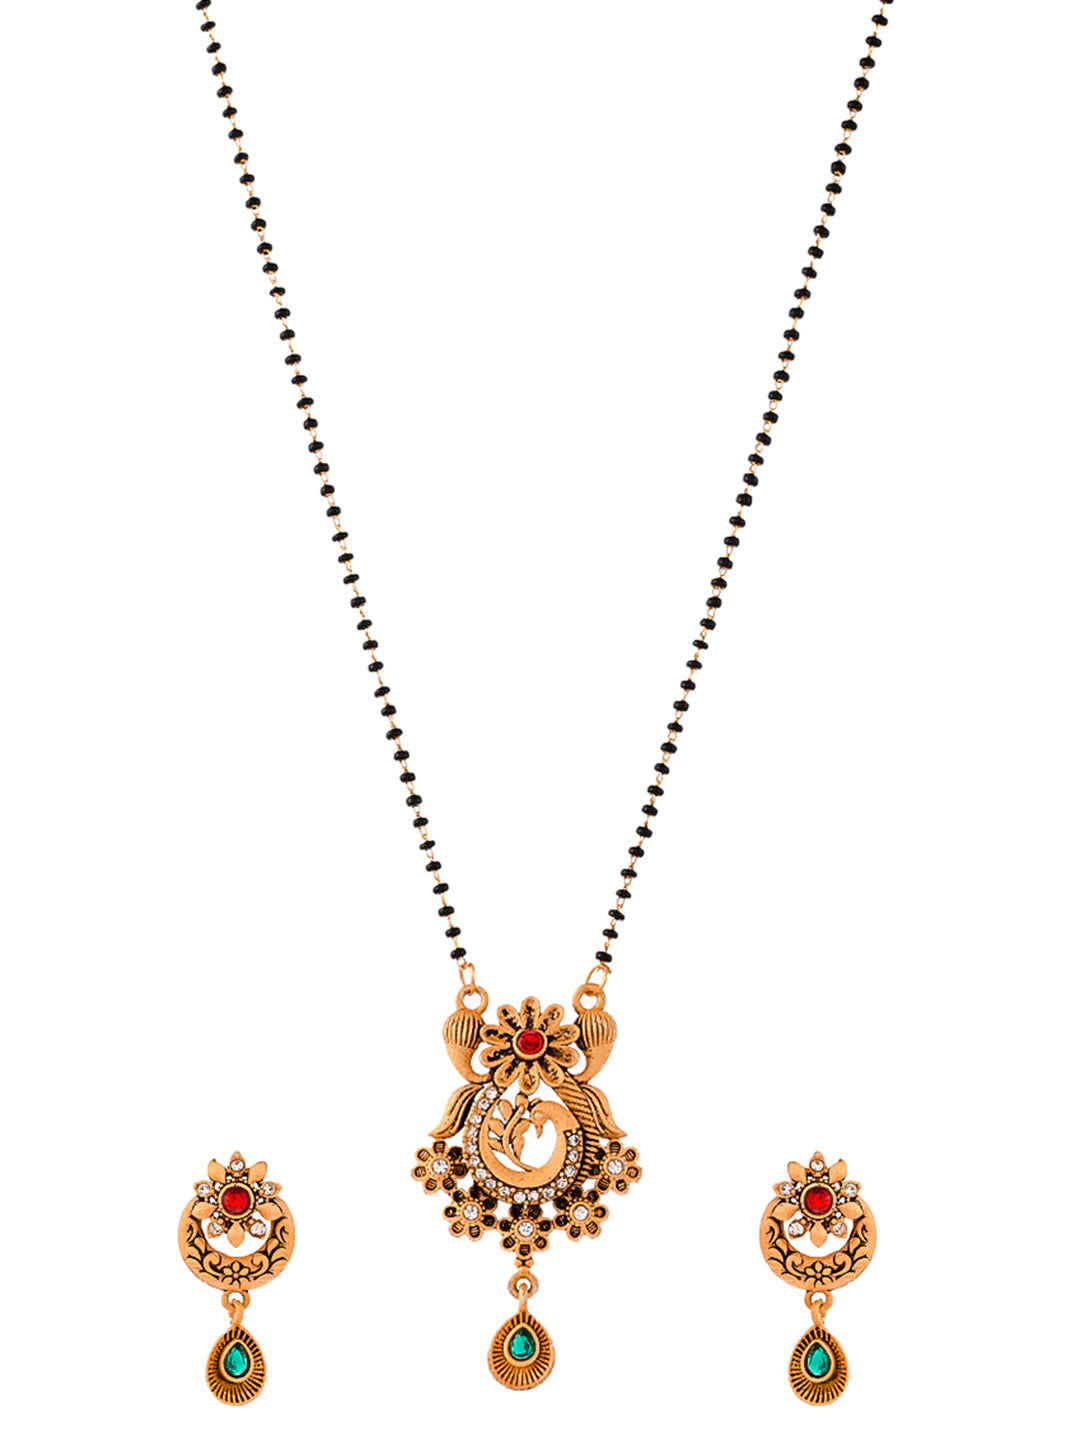 Buy quality 916 Gold Single Line Fancy Mangalsutra With Fancy Diamond  Earrings in Ahmedabad